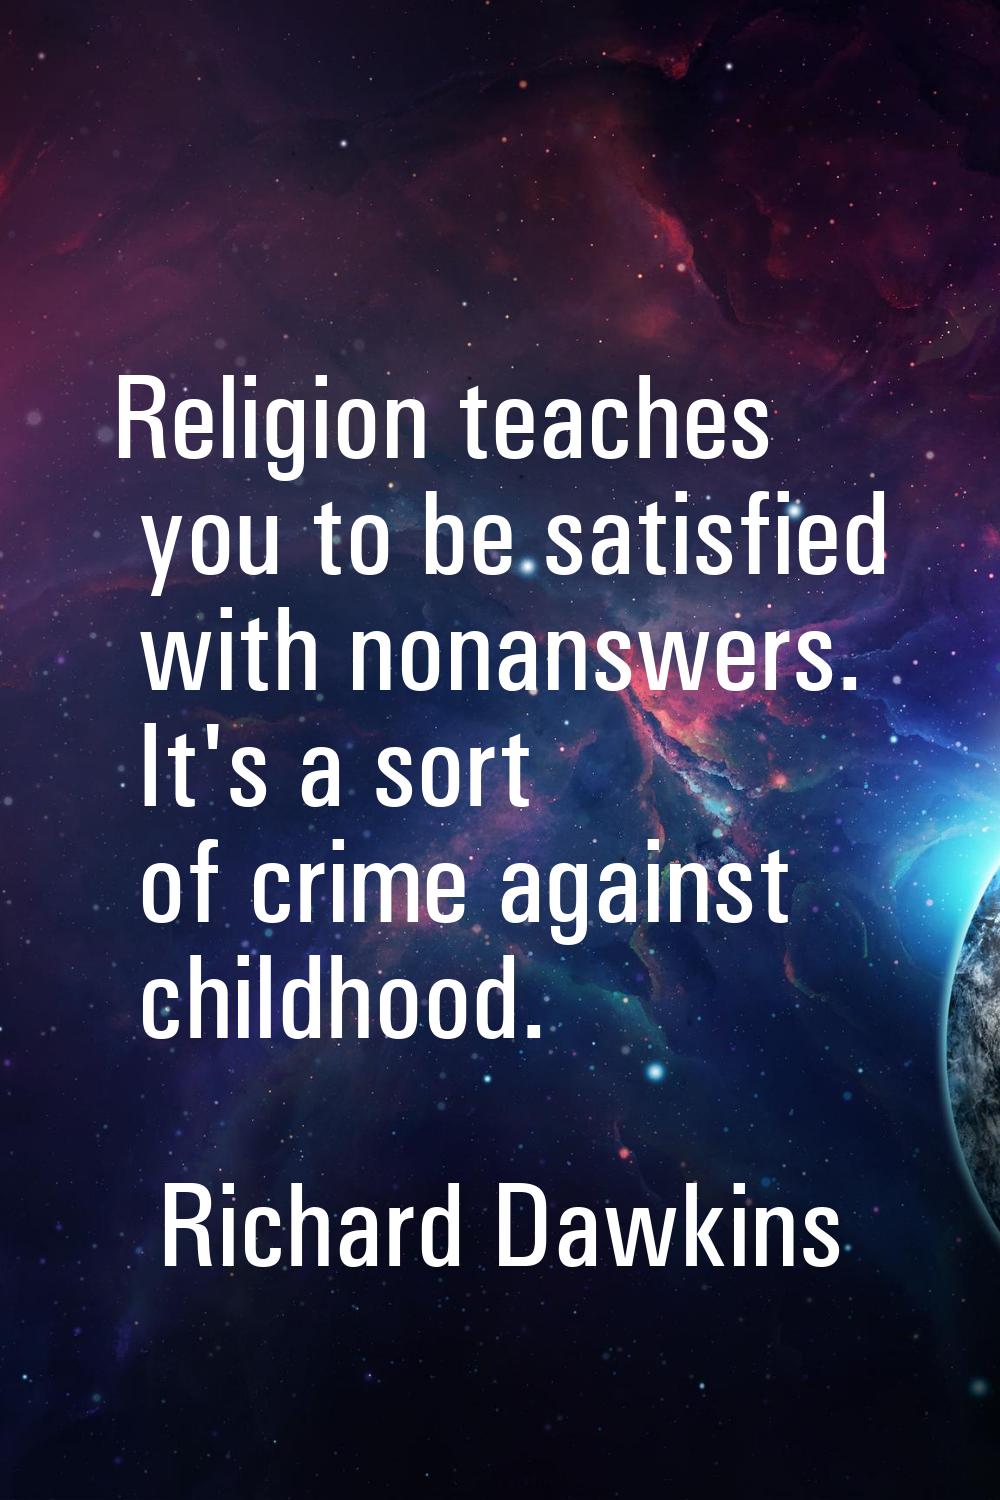 Religion teaches you to be satisfied with nonanswers. It's a sort of crime against childhood.